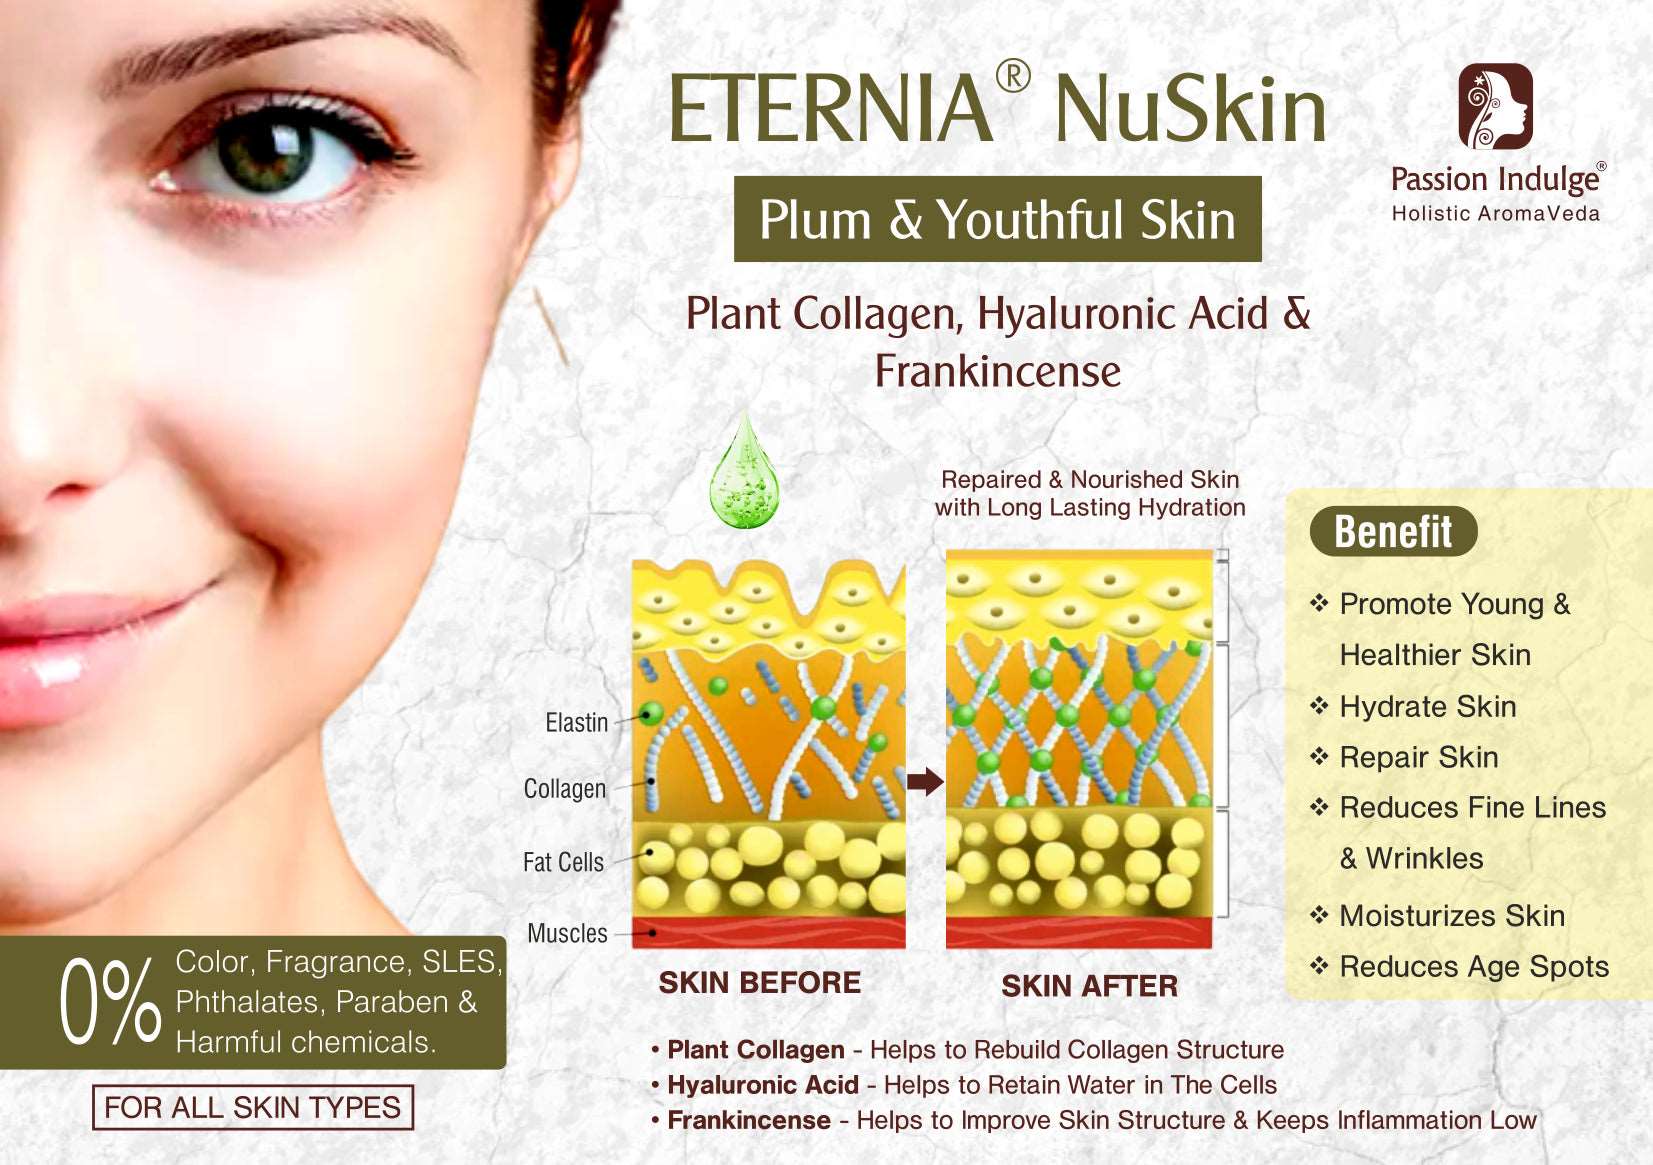 Eternia NuSkin 7 Star Facial Kit For Plum & Youthful Skin With Plant Collagen, Hyaluronic Acid, Frankincense | All Skin Types | Natural & Vegan | professional Kit | ageing kit | anti ageing | everyouth | natural effect | 7 steps